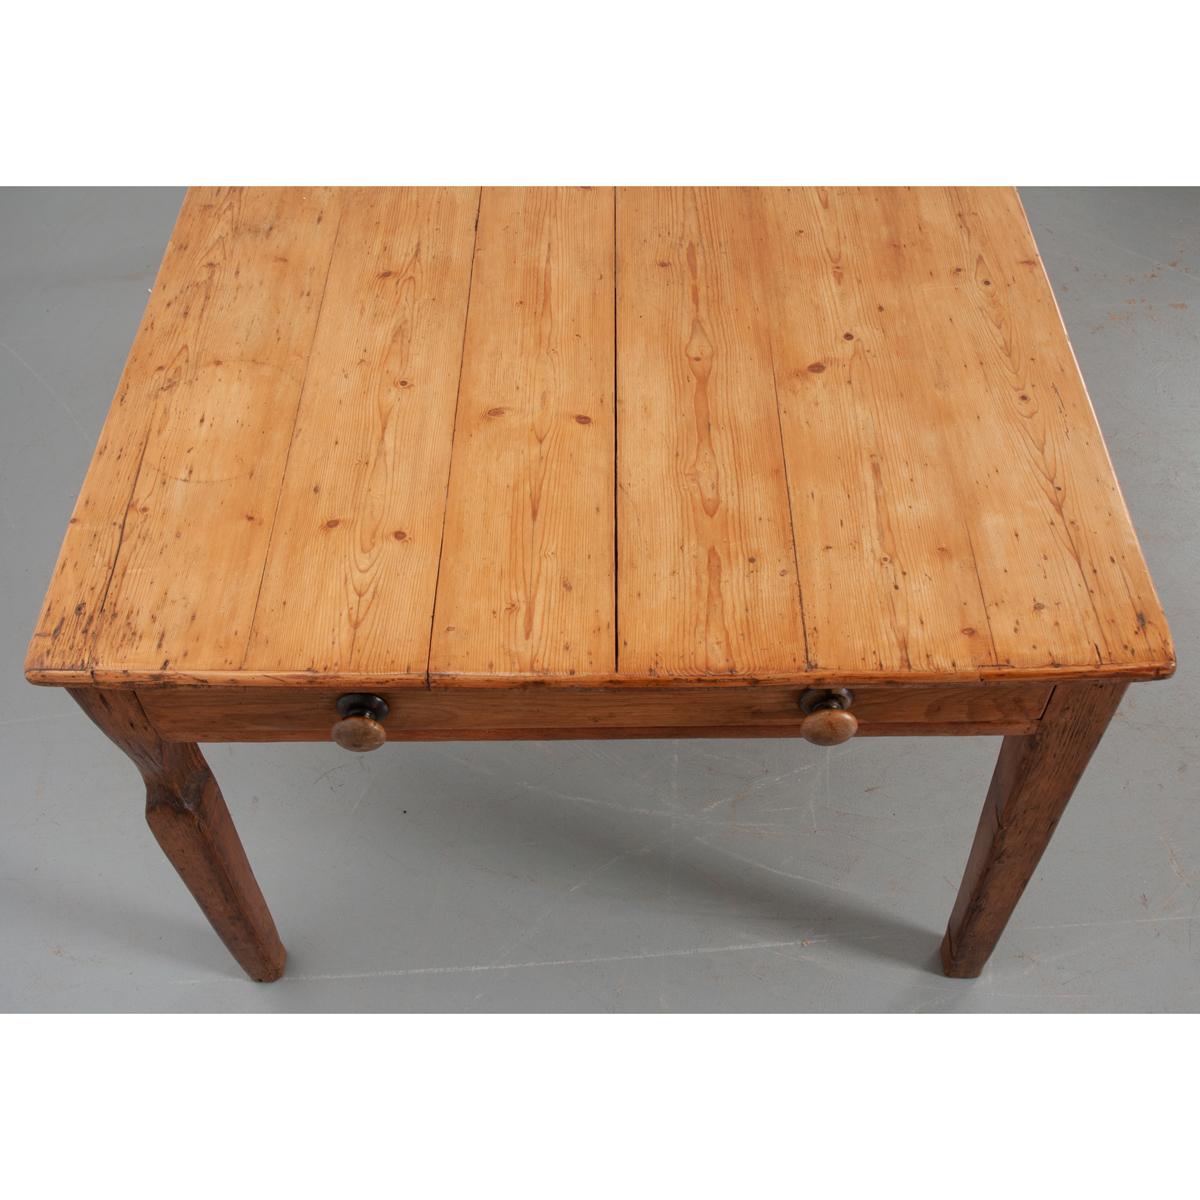 This is an English 19th century pine dining table. The wide and deep top sits over an apron with a large drawer on each end. The drawers have two turned wood knobs each. This table has a wonderful patina and is circa 1870.